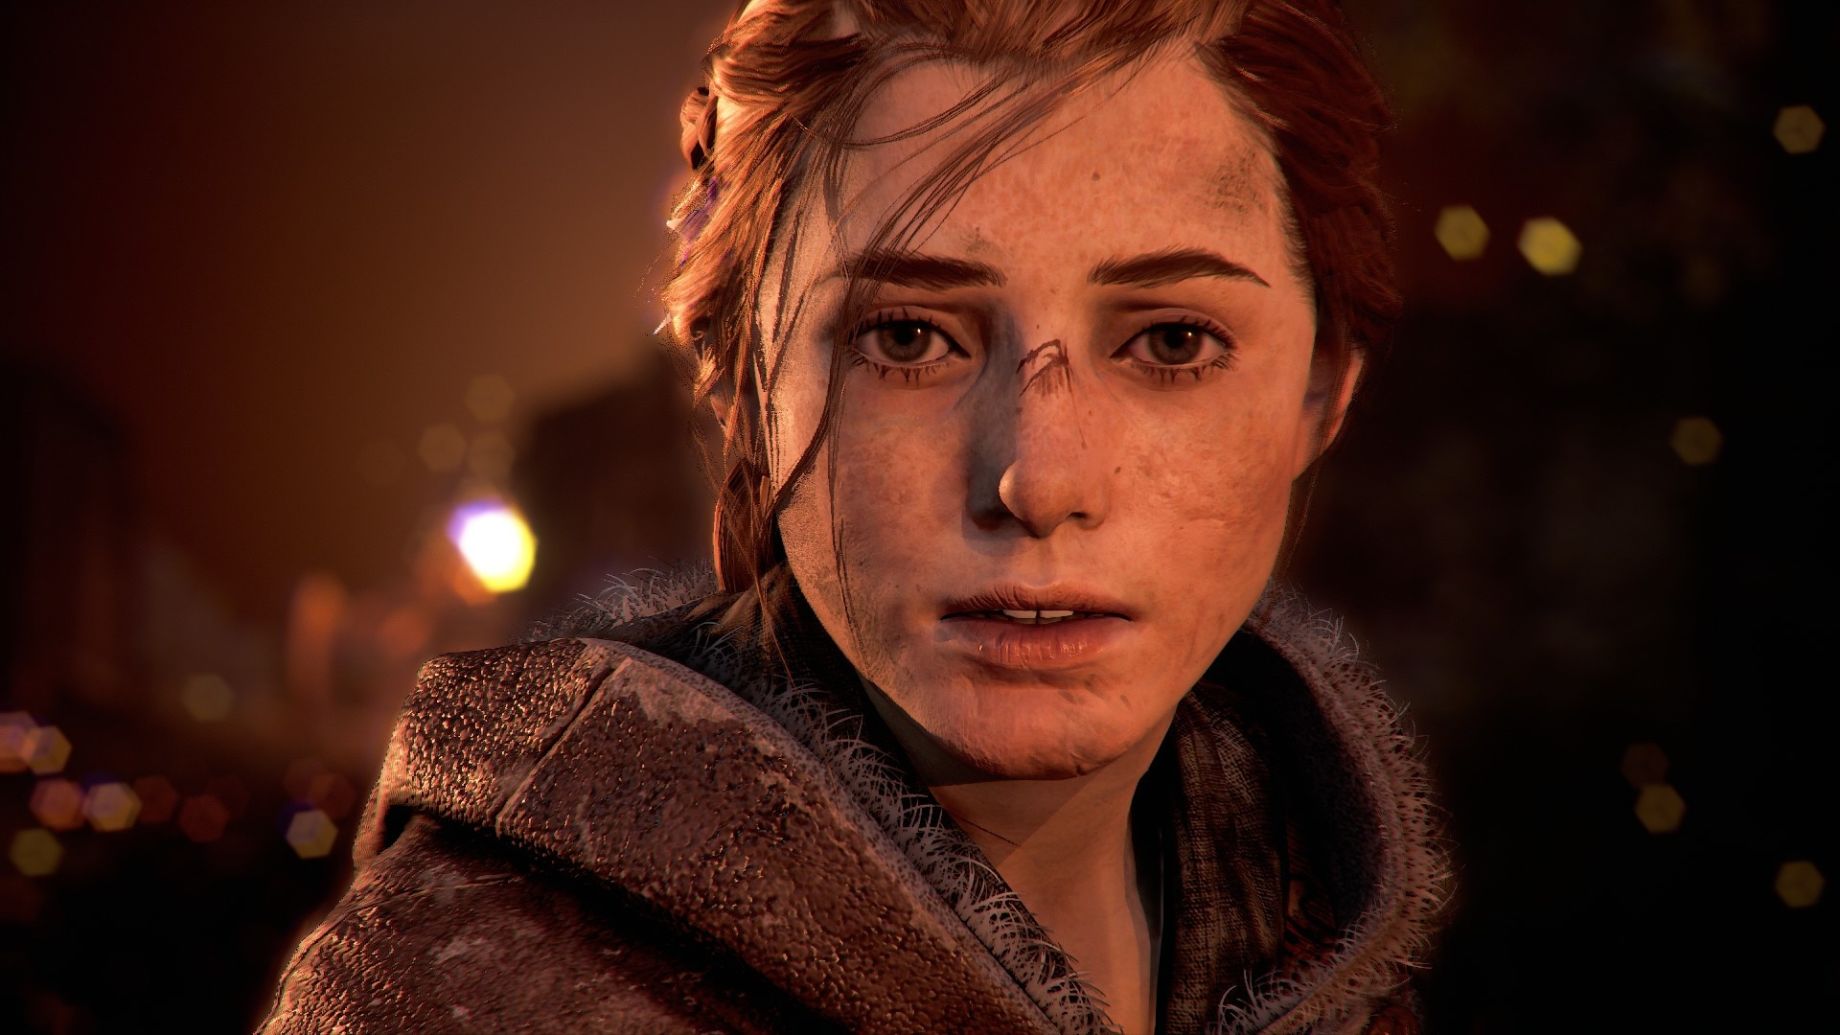 Chilling A Plague Tale: Innocence Launch Trailer Releases